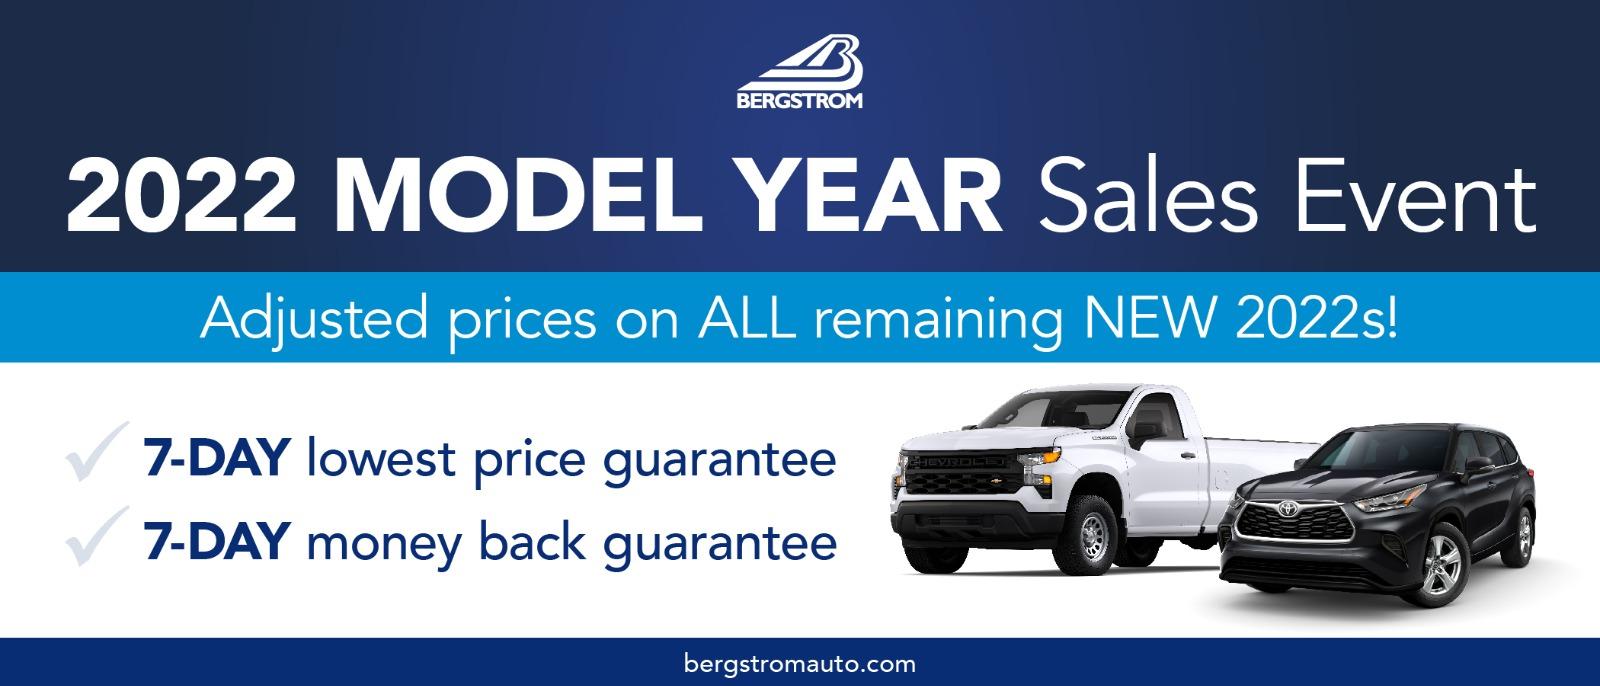 2022 Model Year Sales Event Adjusted Prices on ALL remaining New 2022s